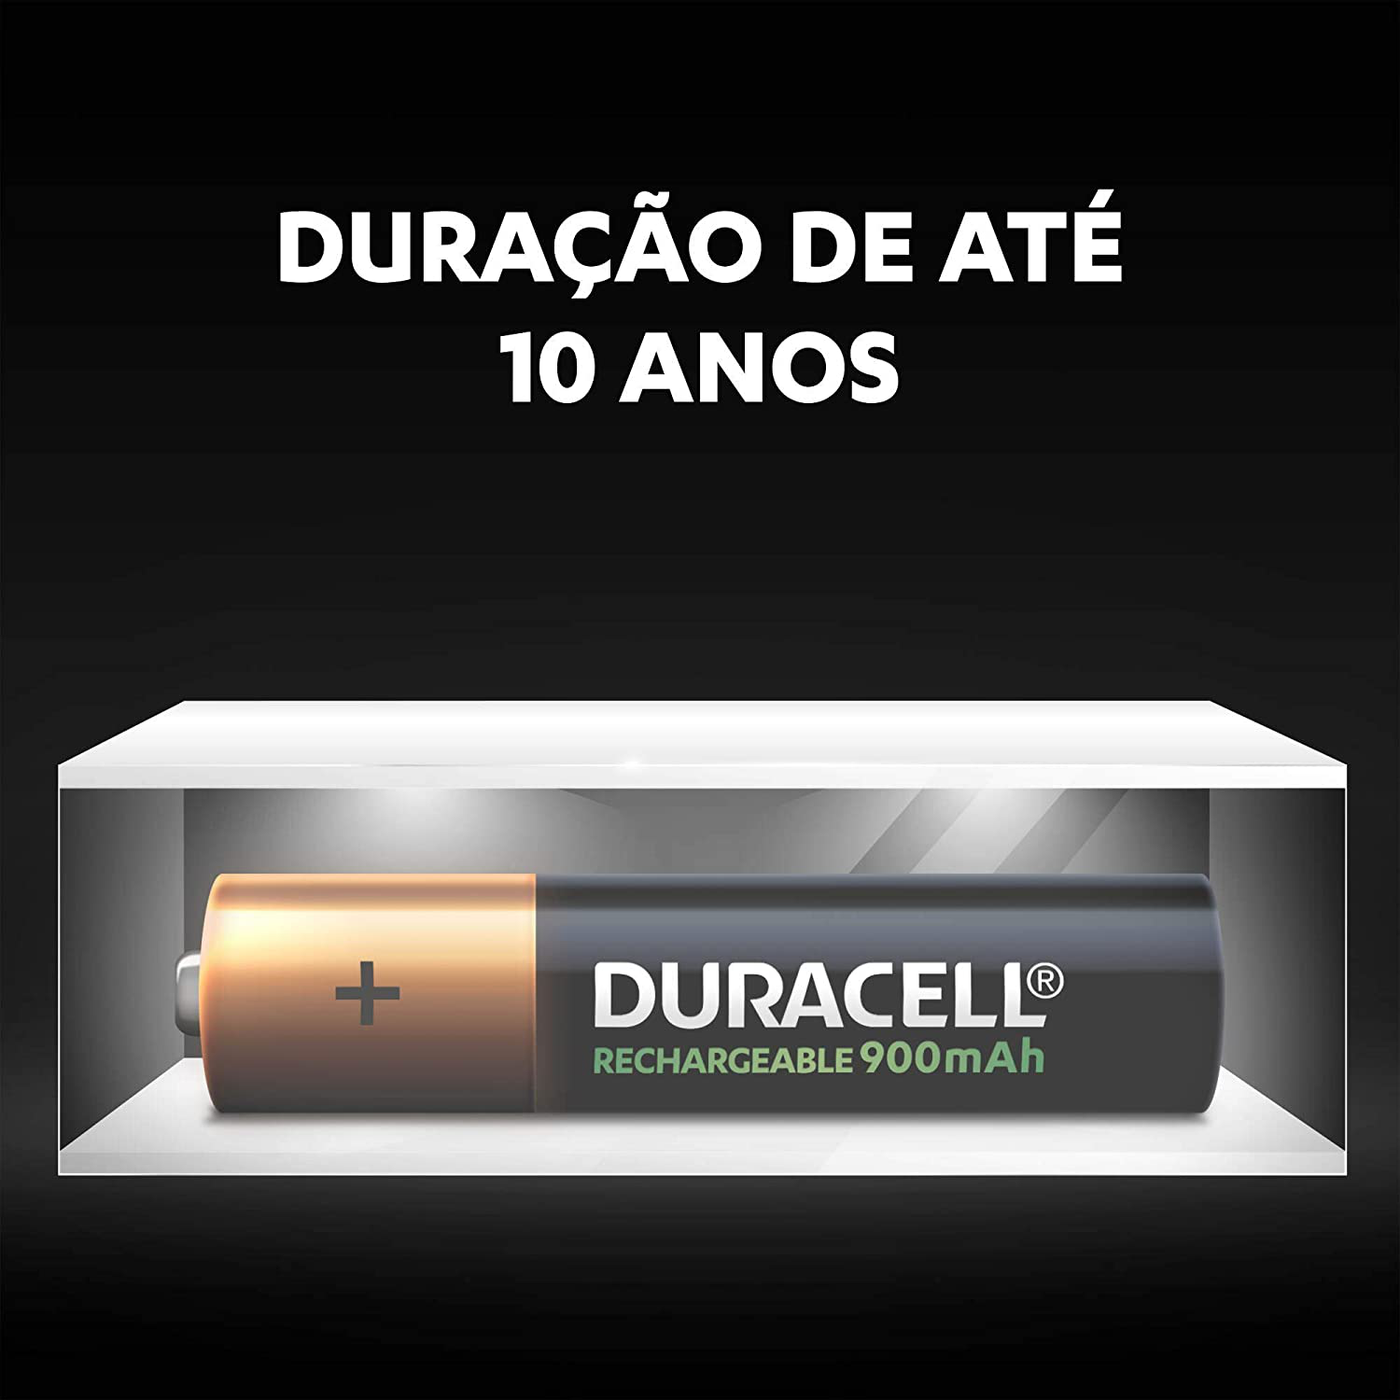 Duracell - Rechargeable AA Batteries - long lasting, all-purpose Double A battery for household and business - 4 count